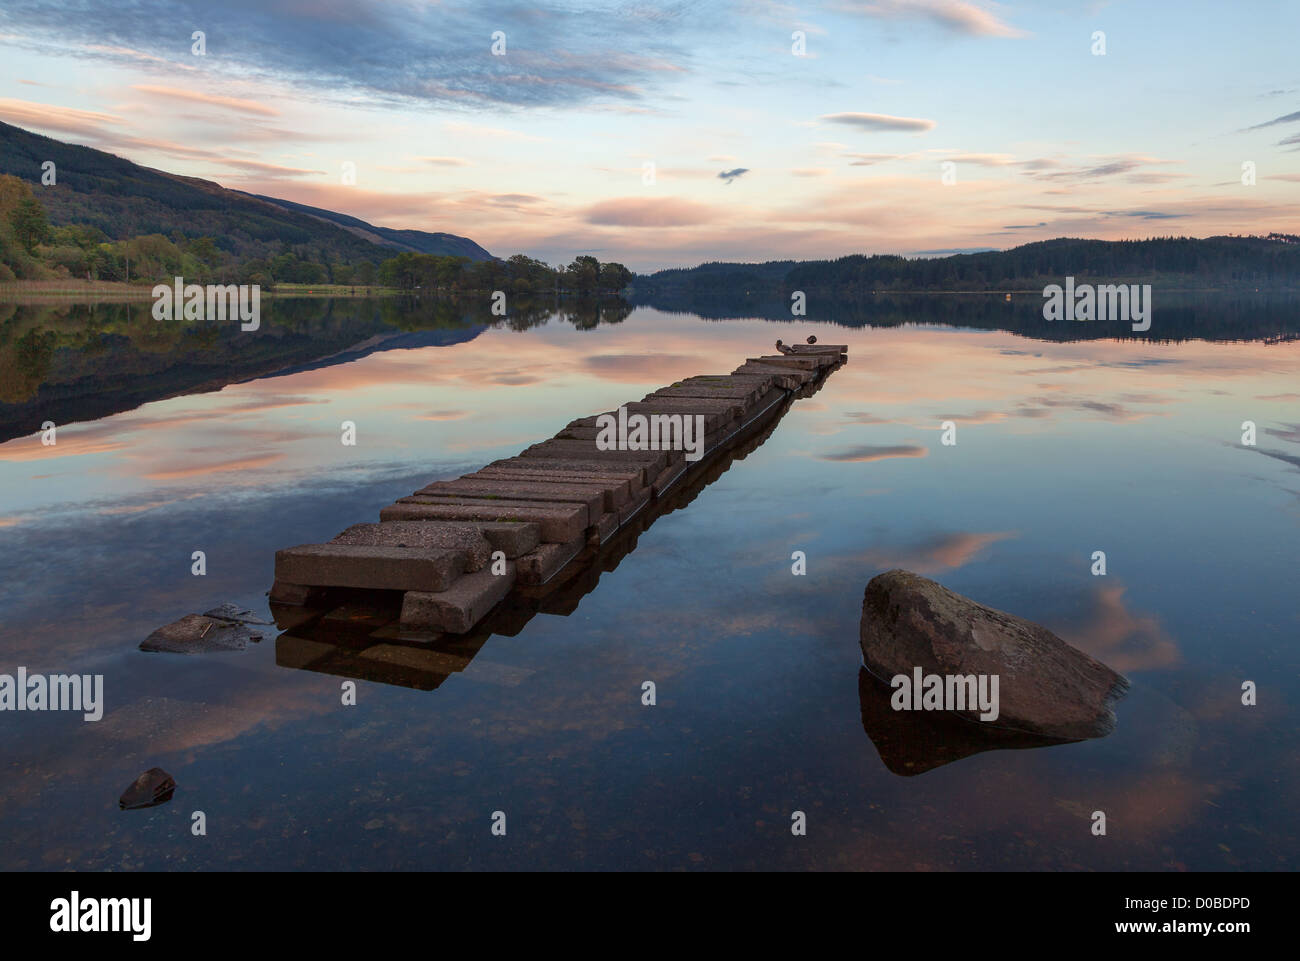 Loch Ard in the Loch Lomond and the Trossachs National Park, Stirling, Scotland at Sunset on a calm evening Stock Photo